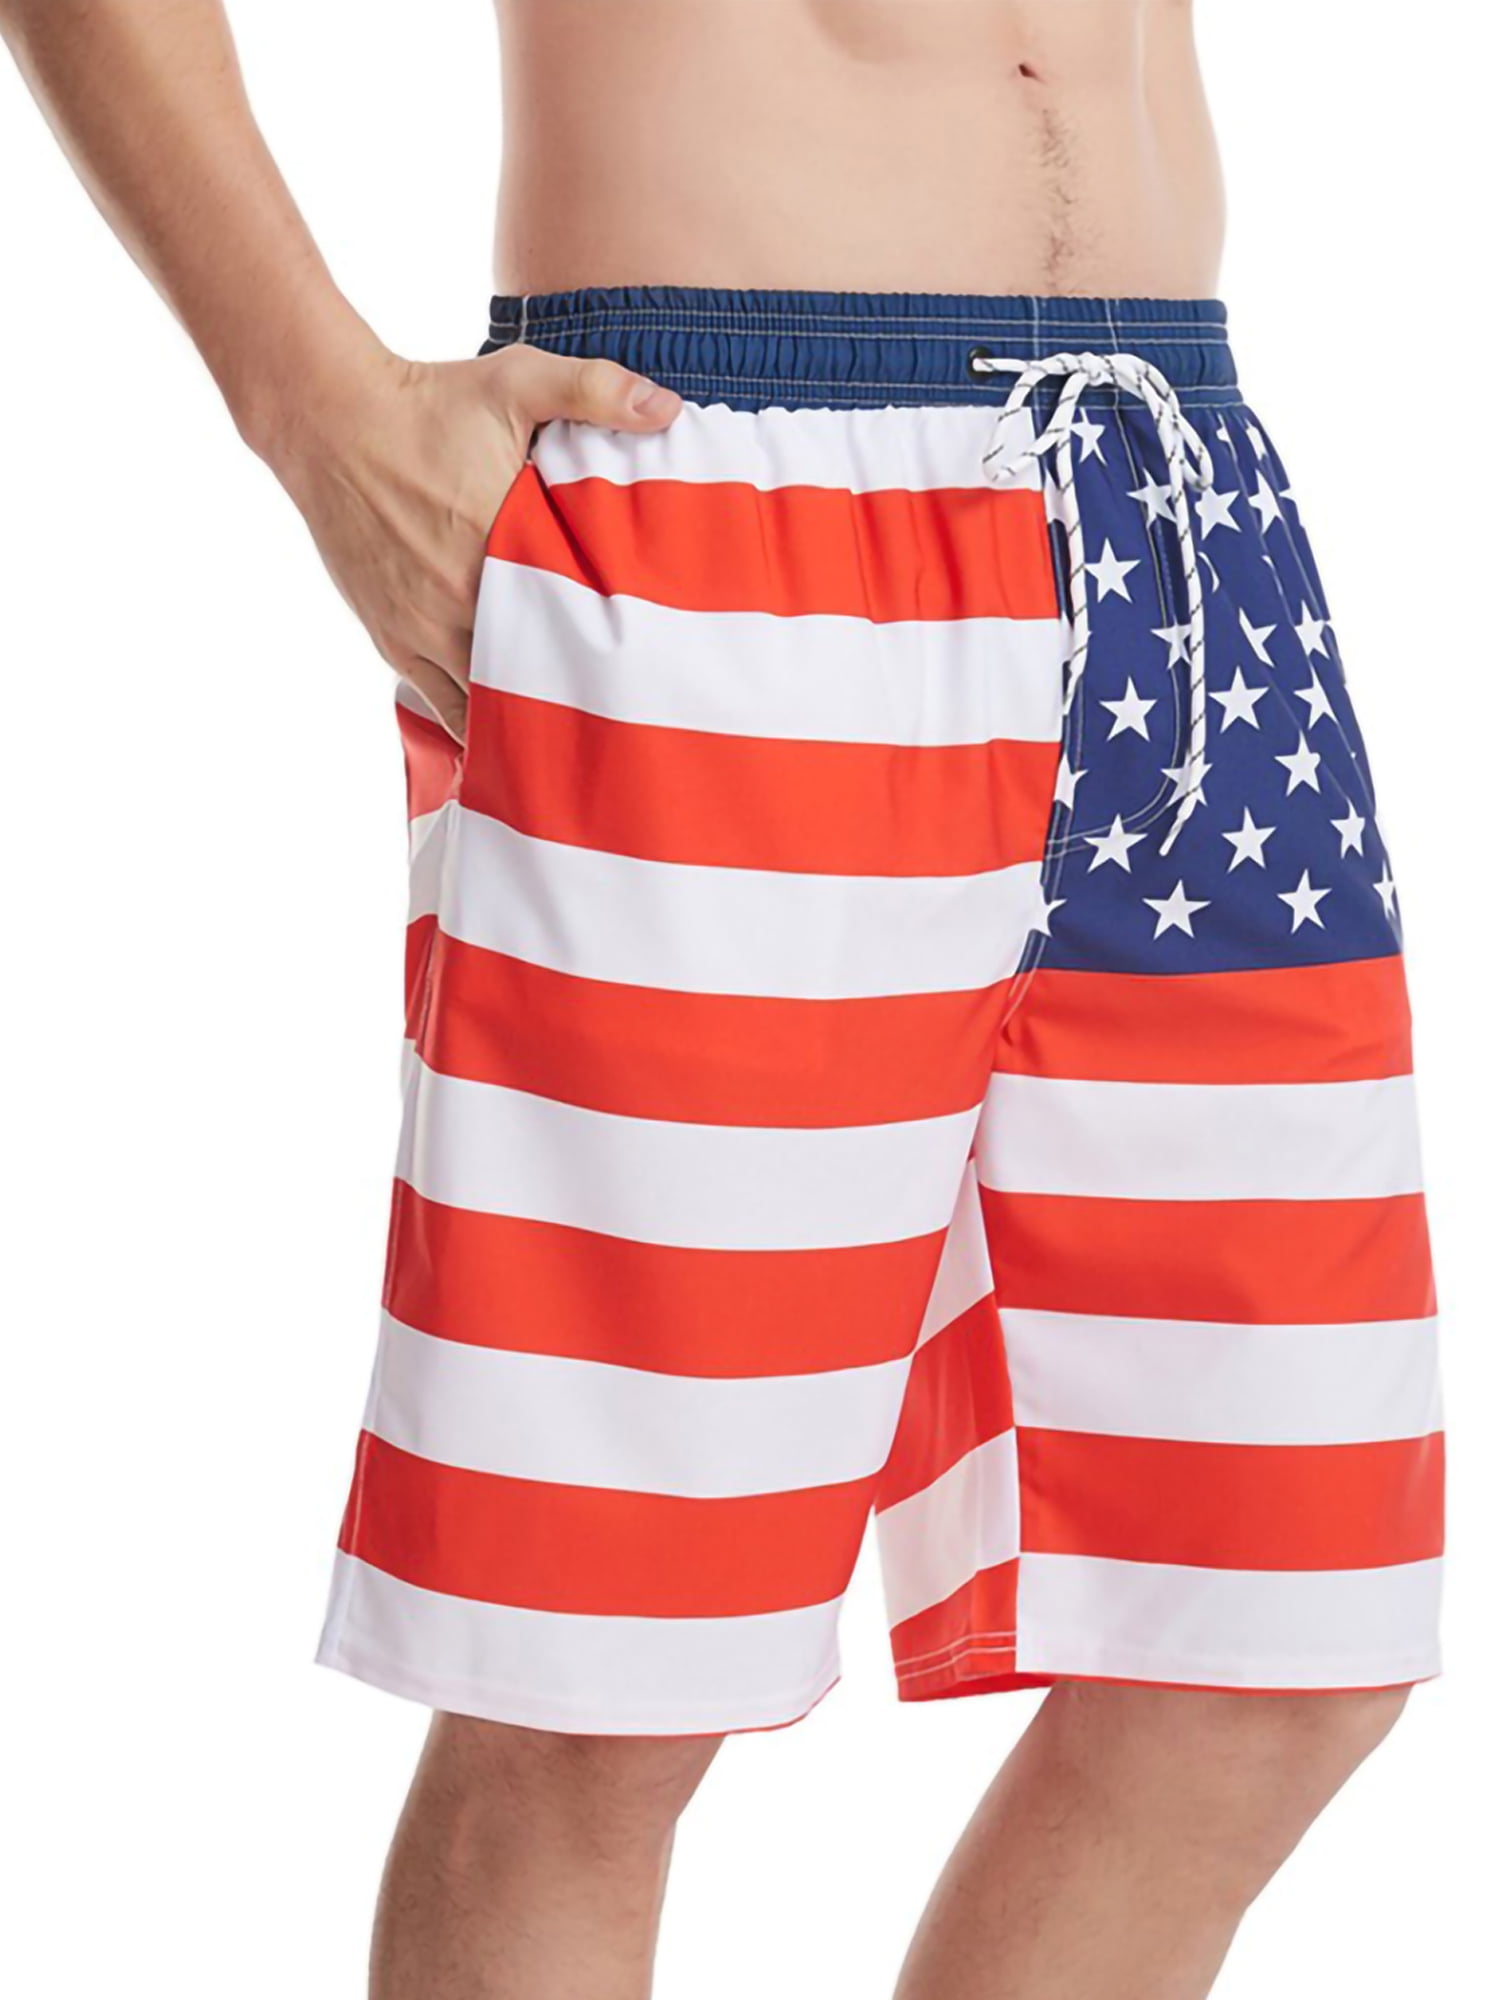 Mens Swim Shorts Quick Dry Swim Trunks Starry Sky Two Eagle Mens Bathing Suits with Mesh Lining